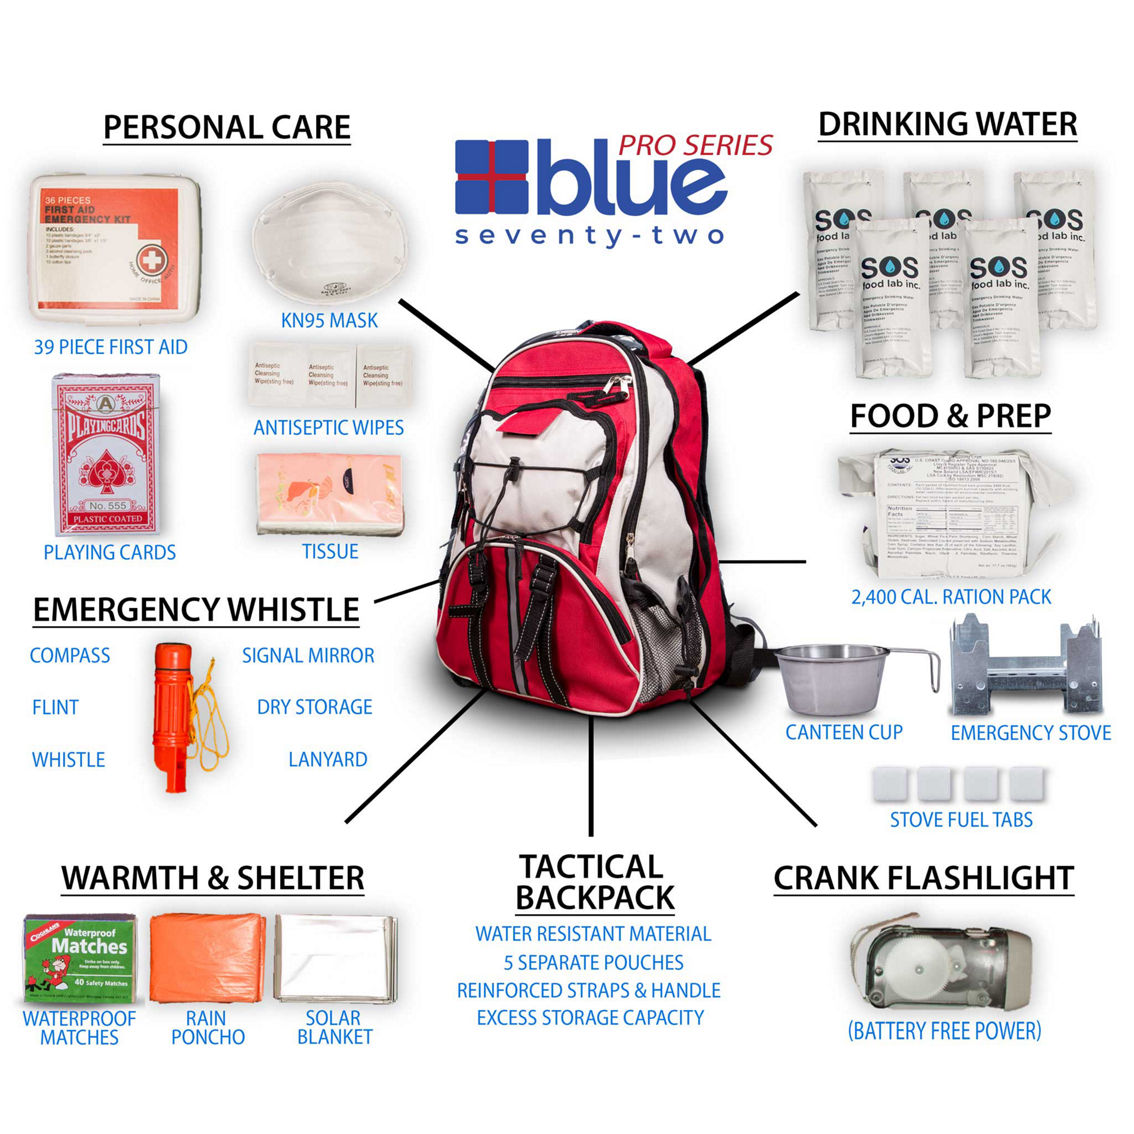 Blue Coolers Pro Series Edition Blue Seventy Two Emergency Survival Backpack - Image 2 of 2